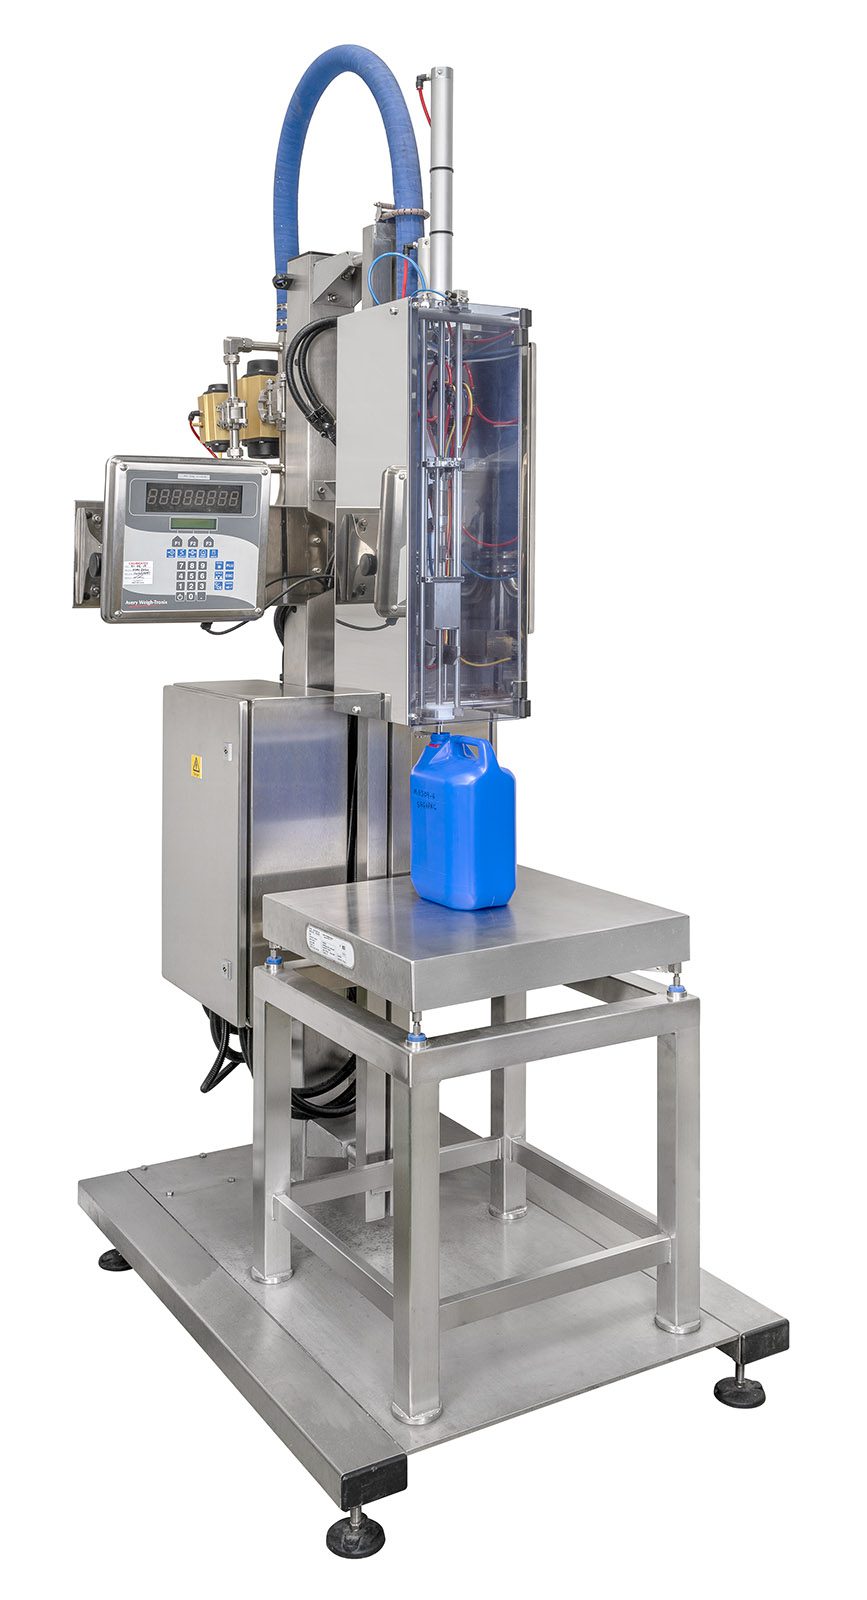 Adelphi Masterfil S5000-S Weigh Scale Semi-Automatic Filling Machine for Chemicals